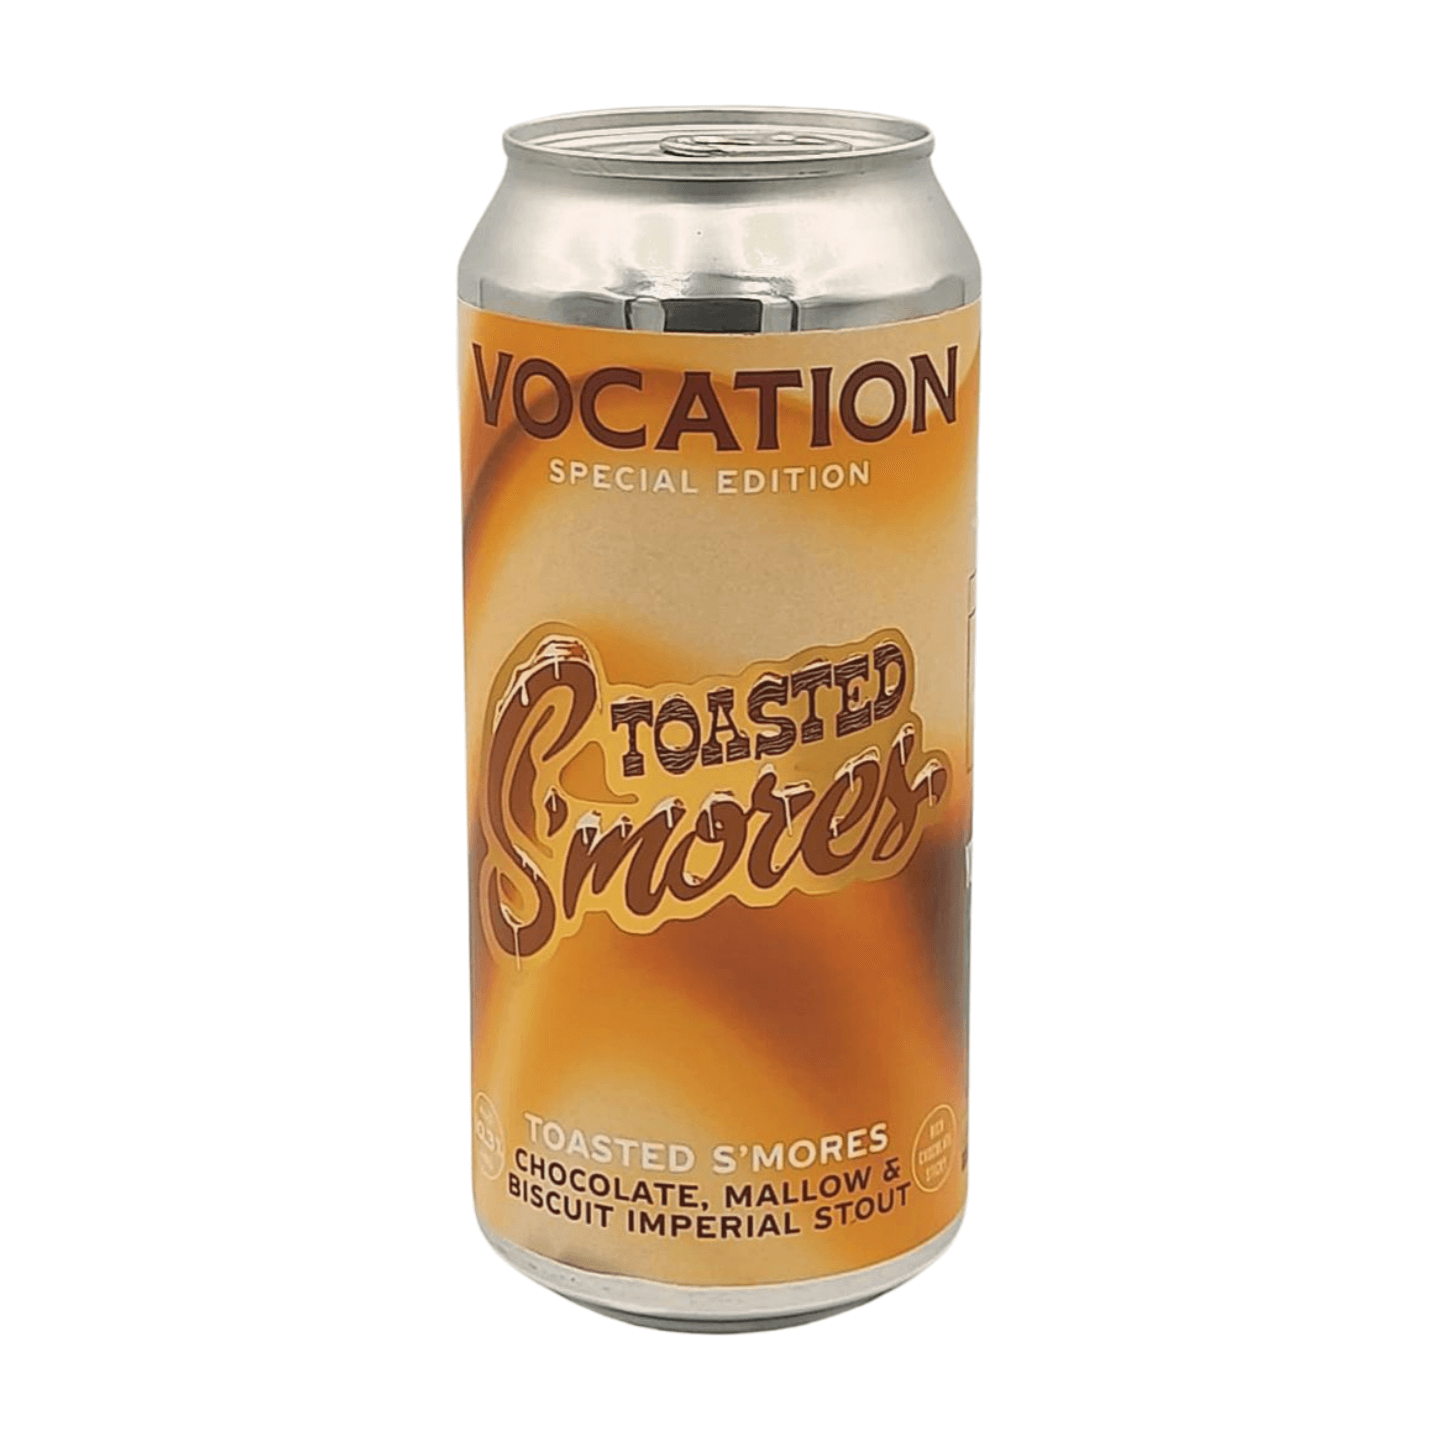 Vocation Brewery Toasted S'mores | Chocolate Mallow & Biscuit Imperial Stout Webshop Online Verdins Bierwinkel Rotterdam